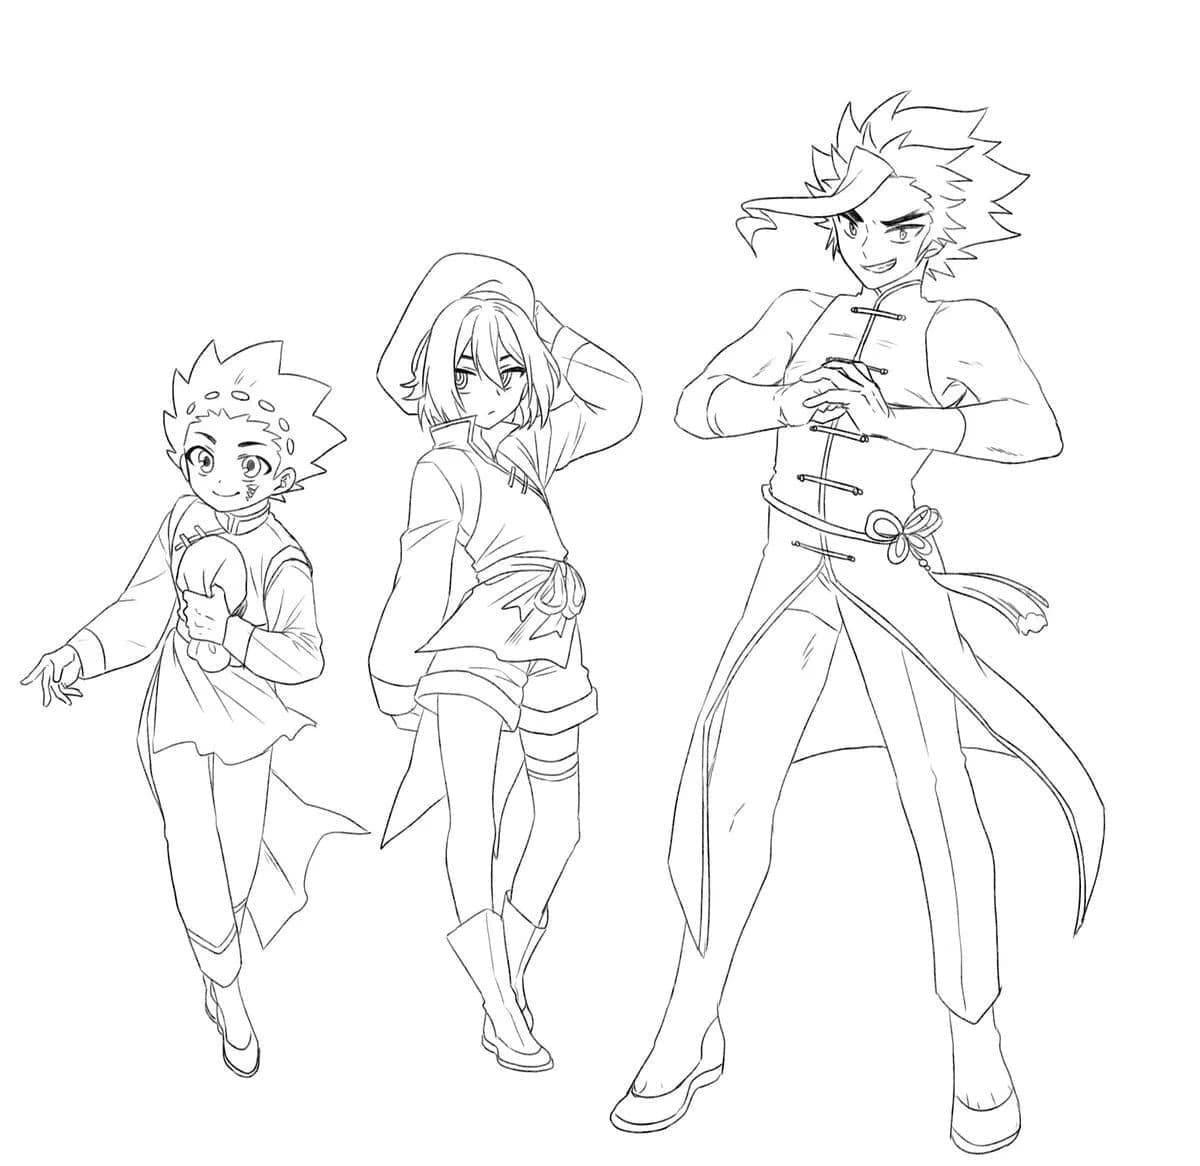 Characters from Beyblade